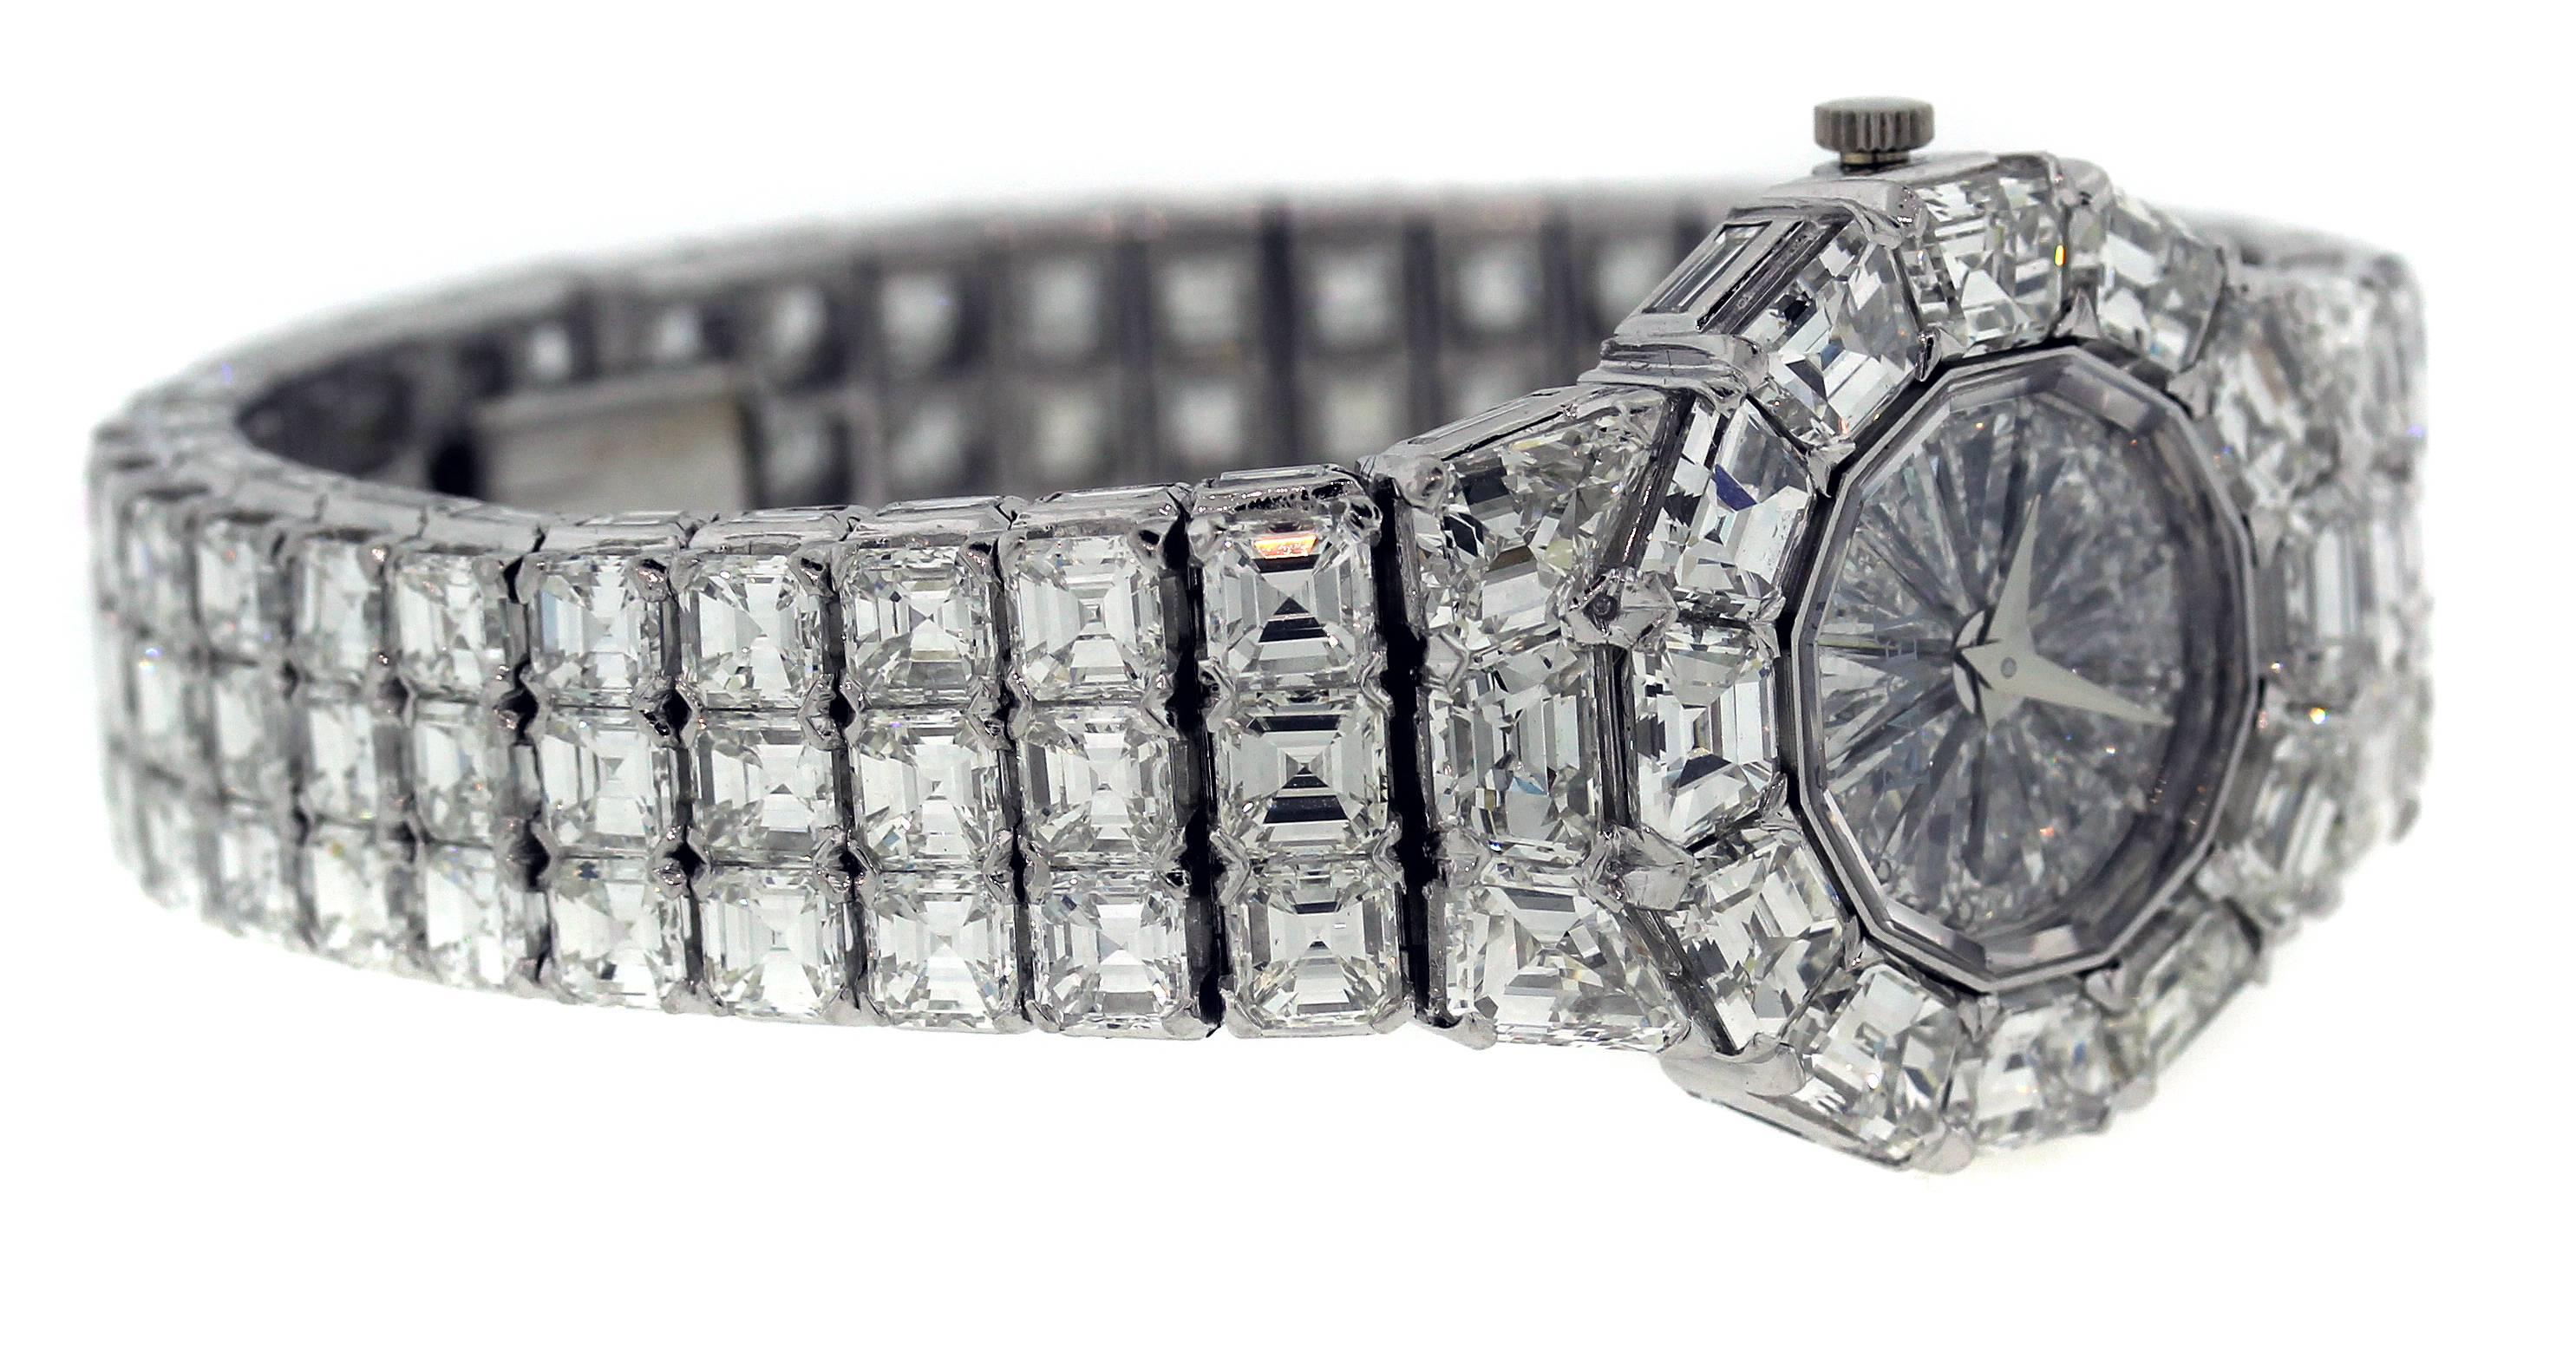 One-of-a-kind wrist watch by Swiss watchmaker Piaget

Set with 172 brilliant-cut diamonds (Apprx. 70 carats) throughout entire bracelet, round case, with back engraved with Piaget, the reference number and secured by four screws. Diamonds are